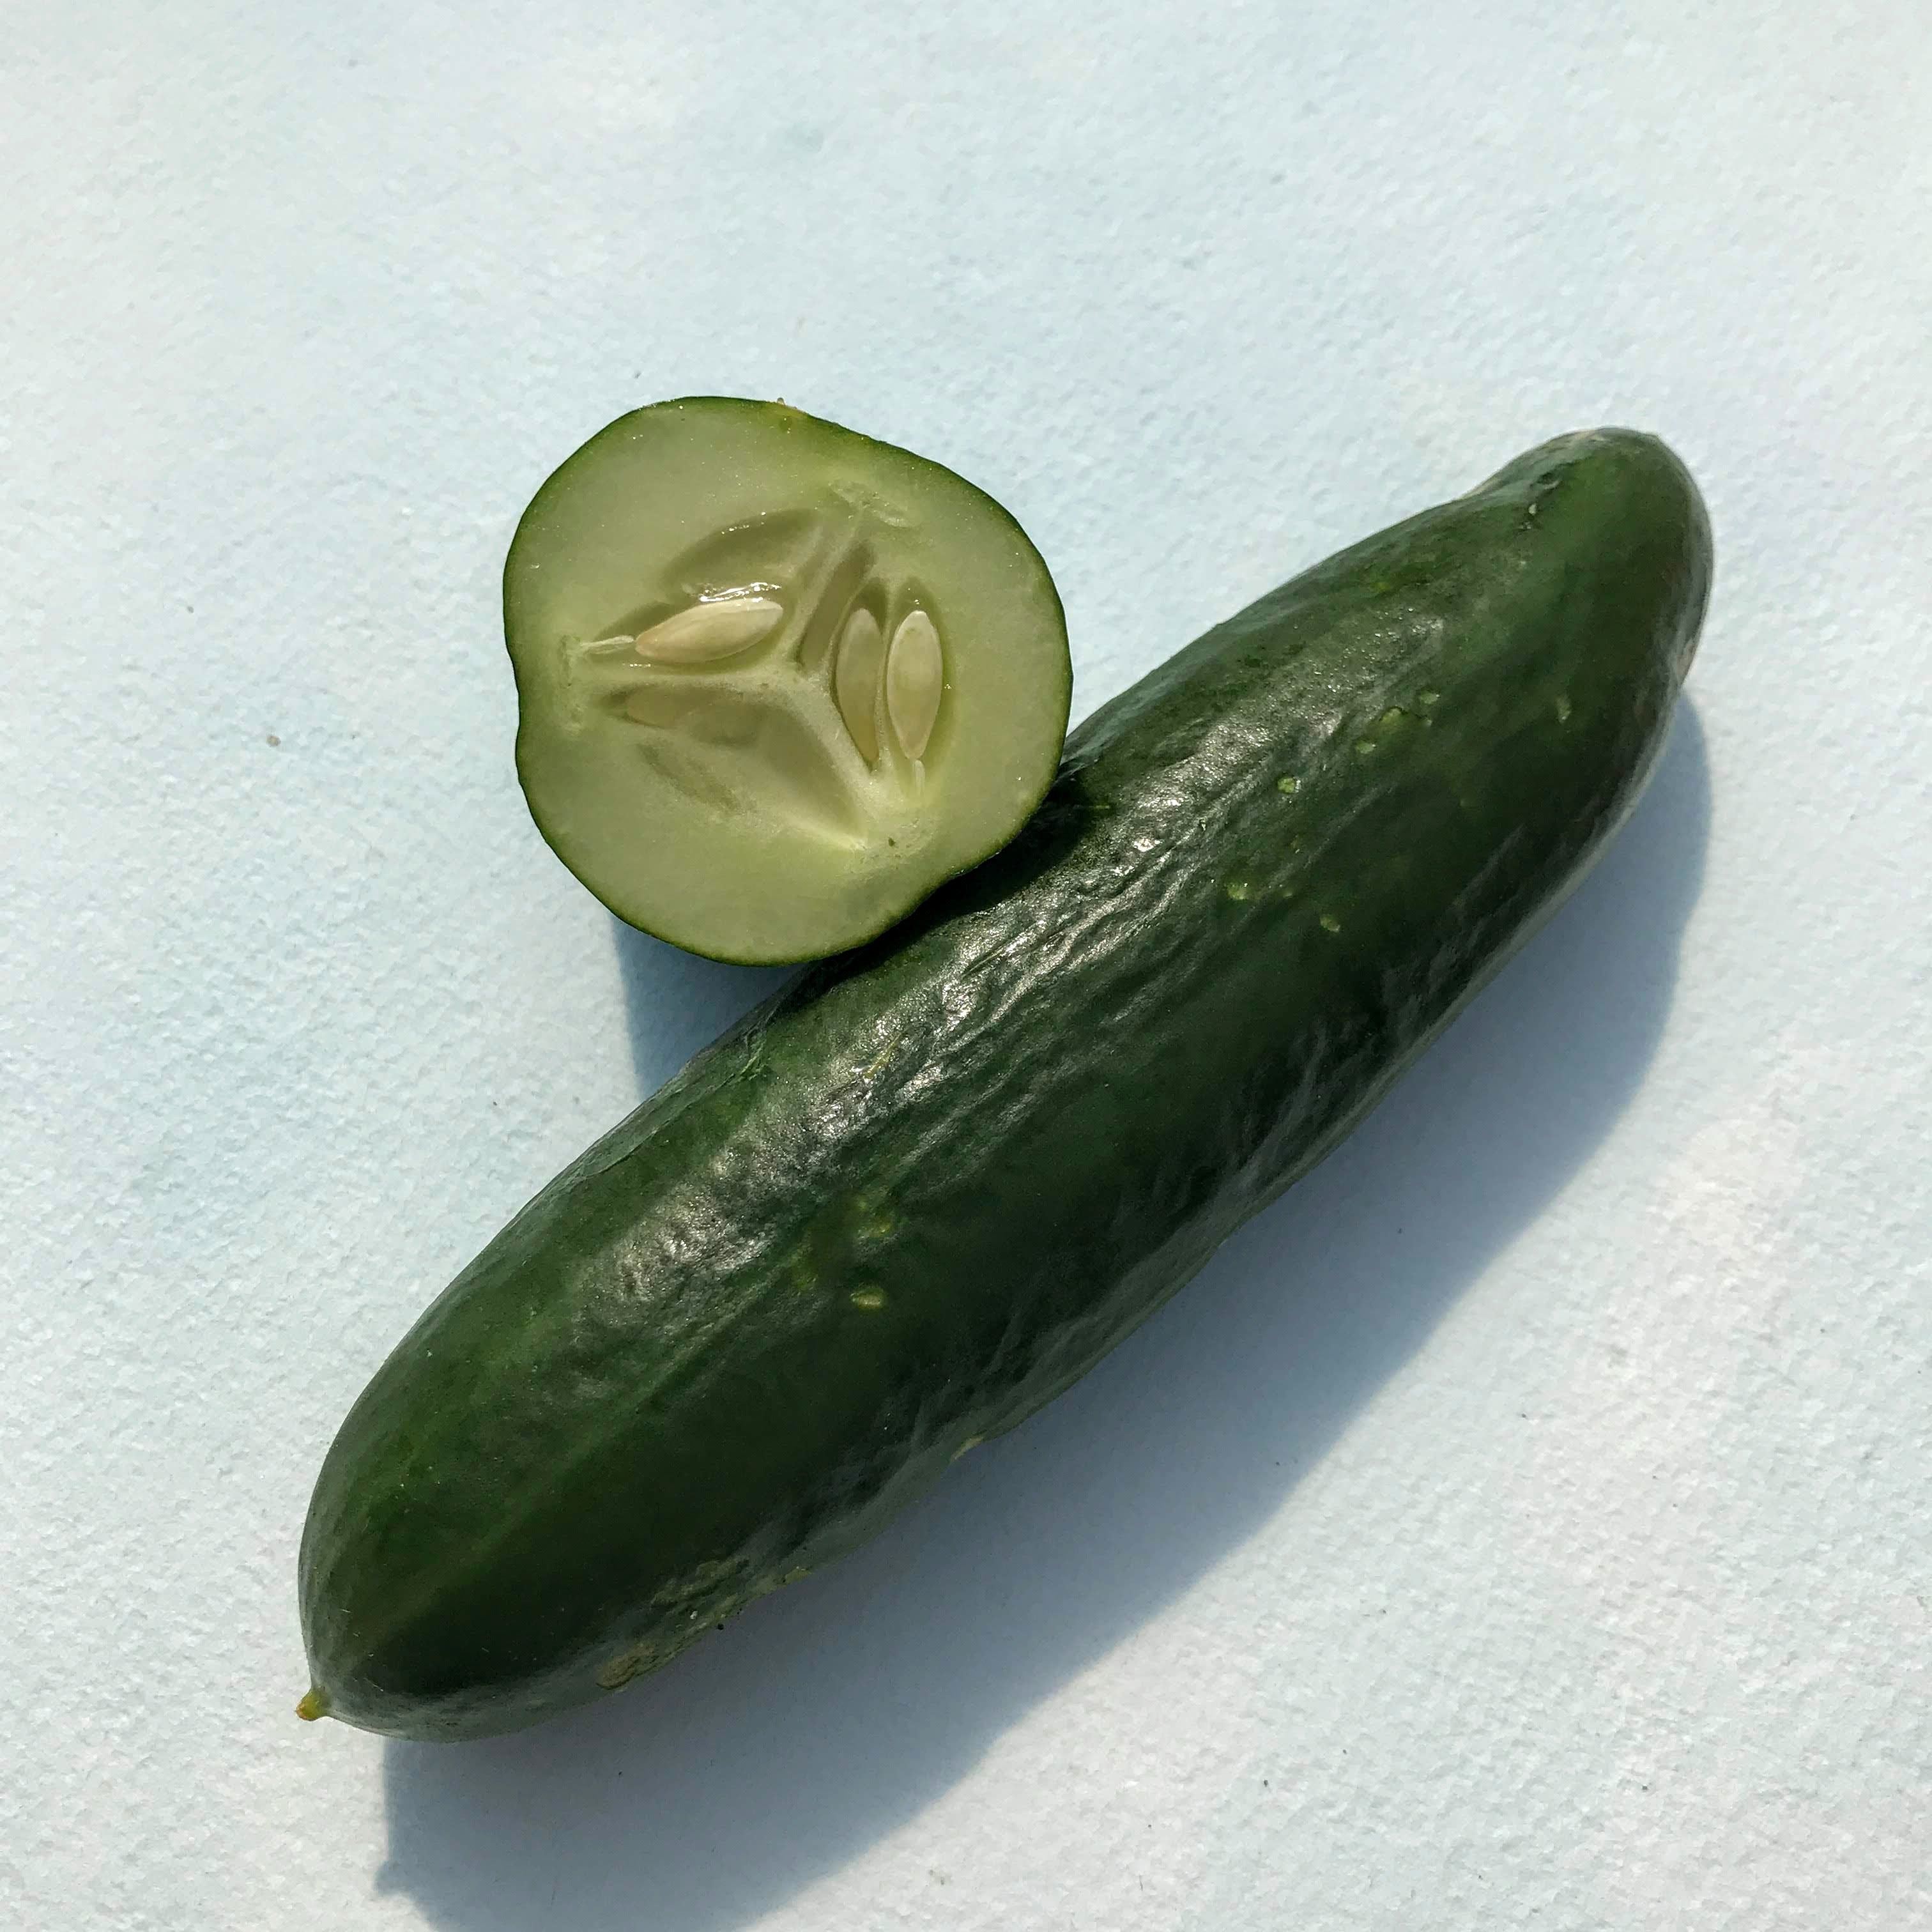 Cucumber Varieties and How to Use Them